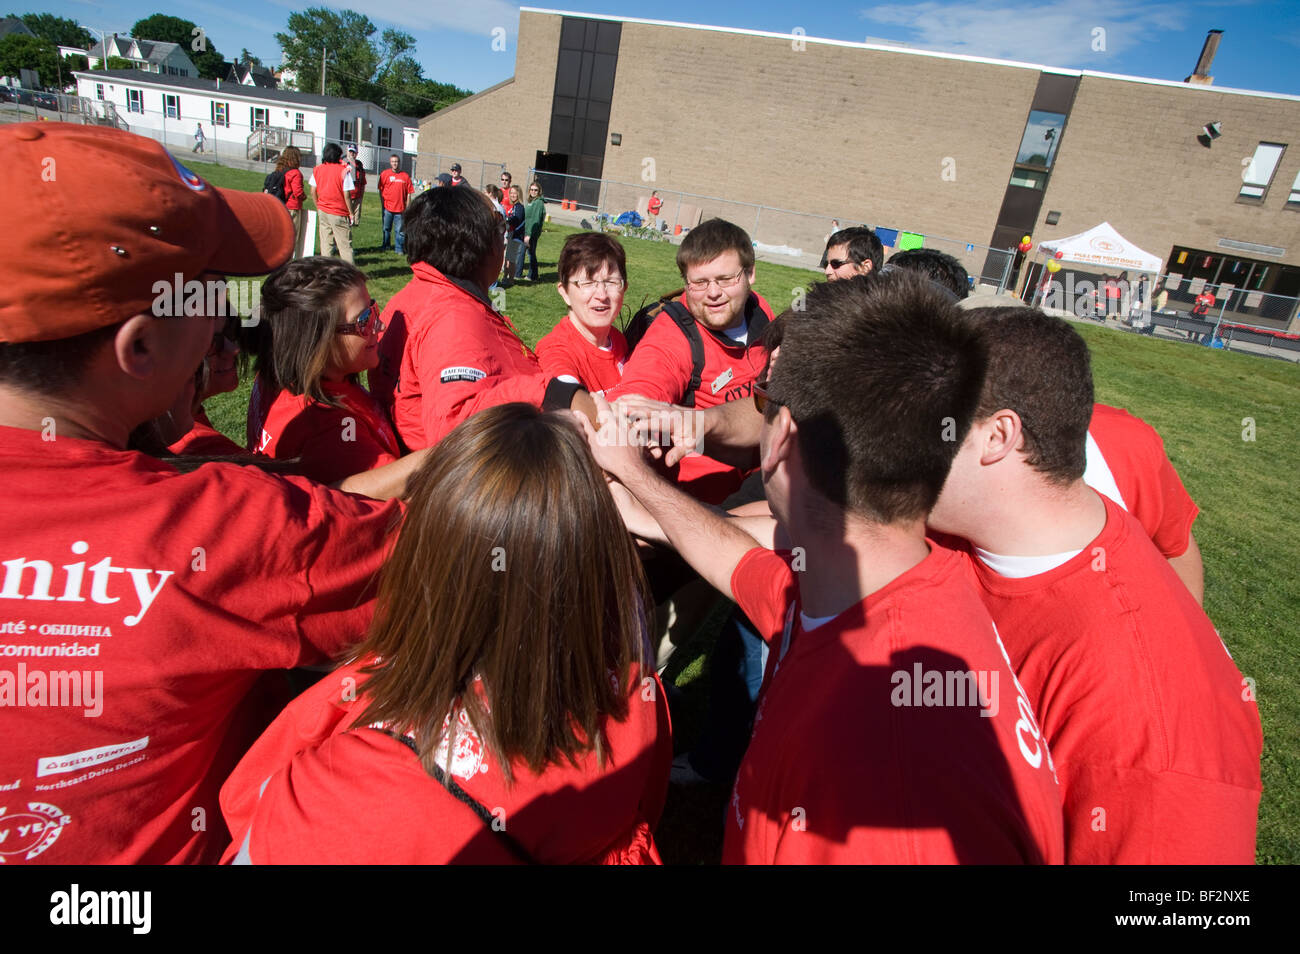 City Year participants start the day with a team building cheer at Beech Elementary School, Manchester, NH. Stock Photo